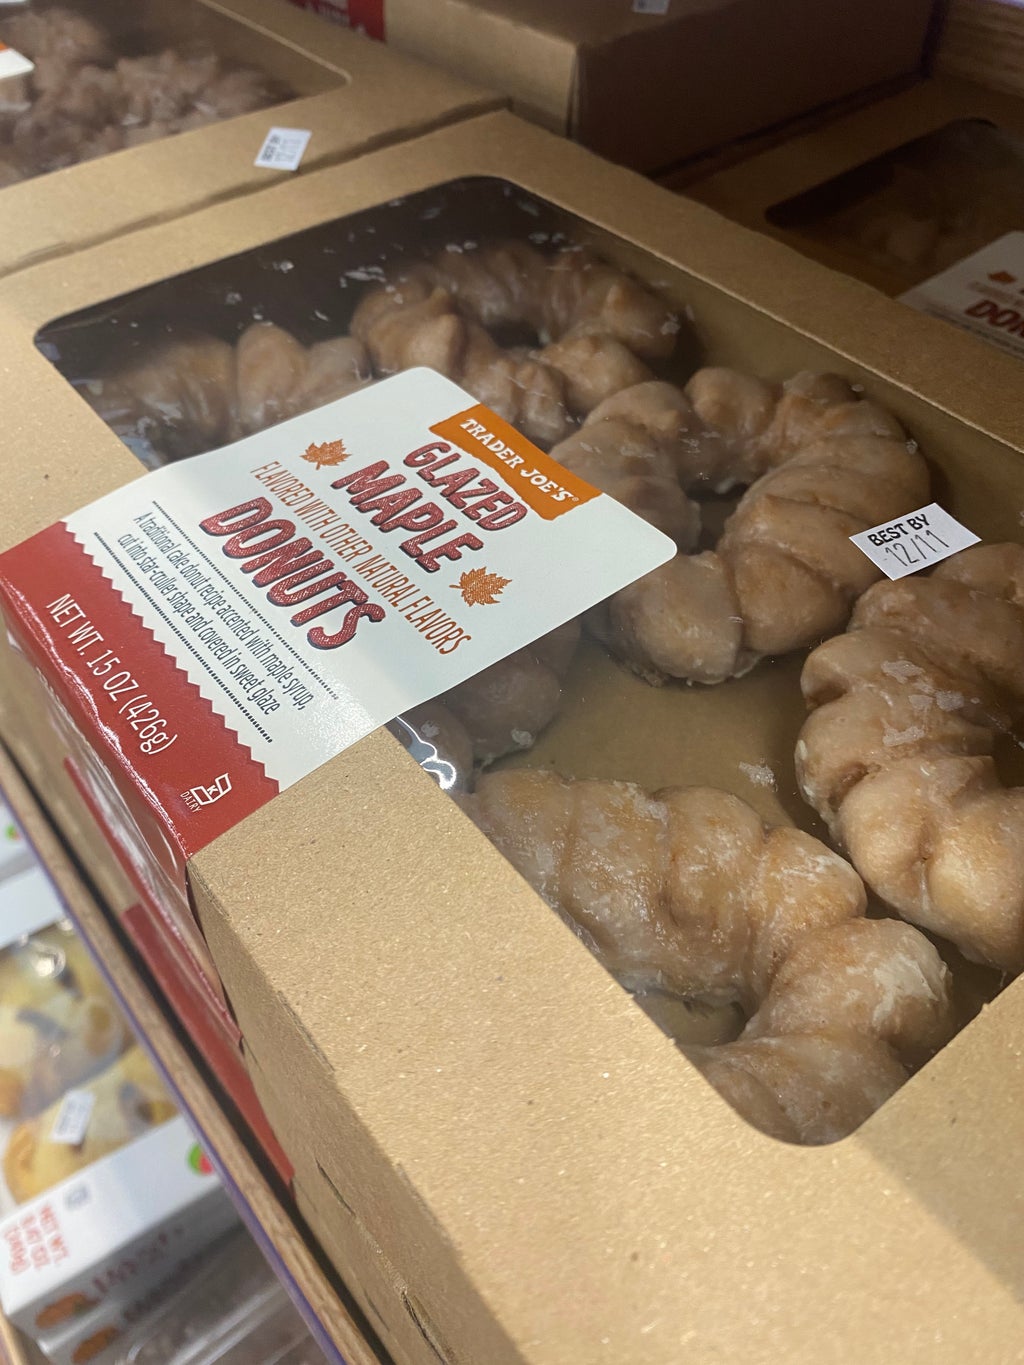 Glazed maple donuts from Trader Joes